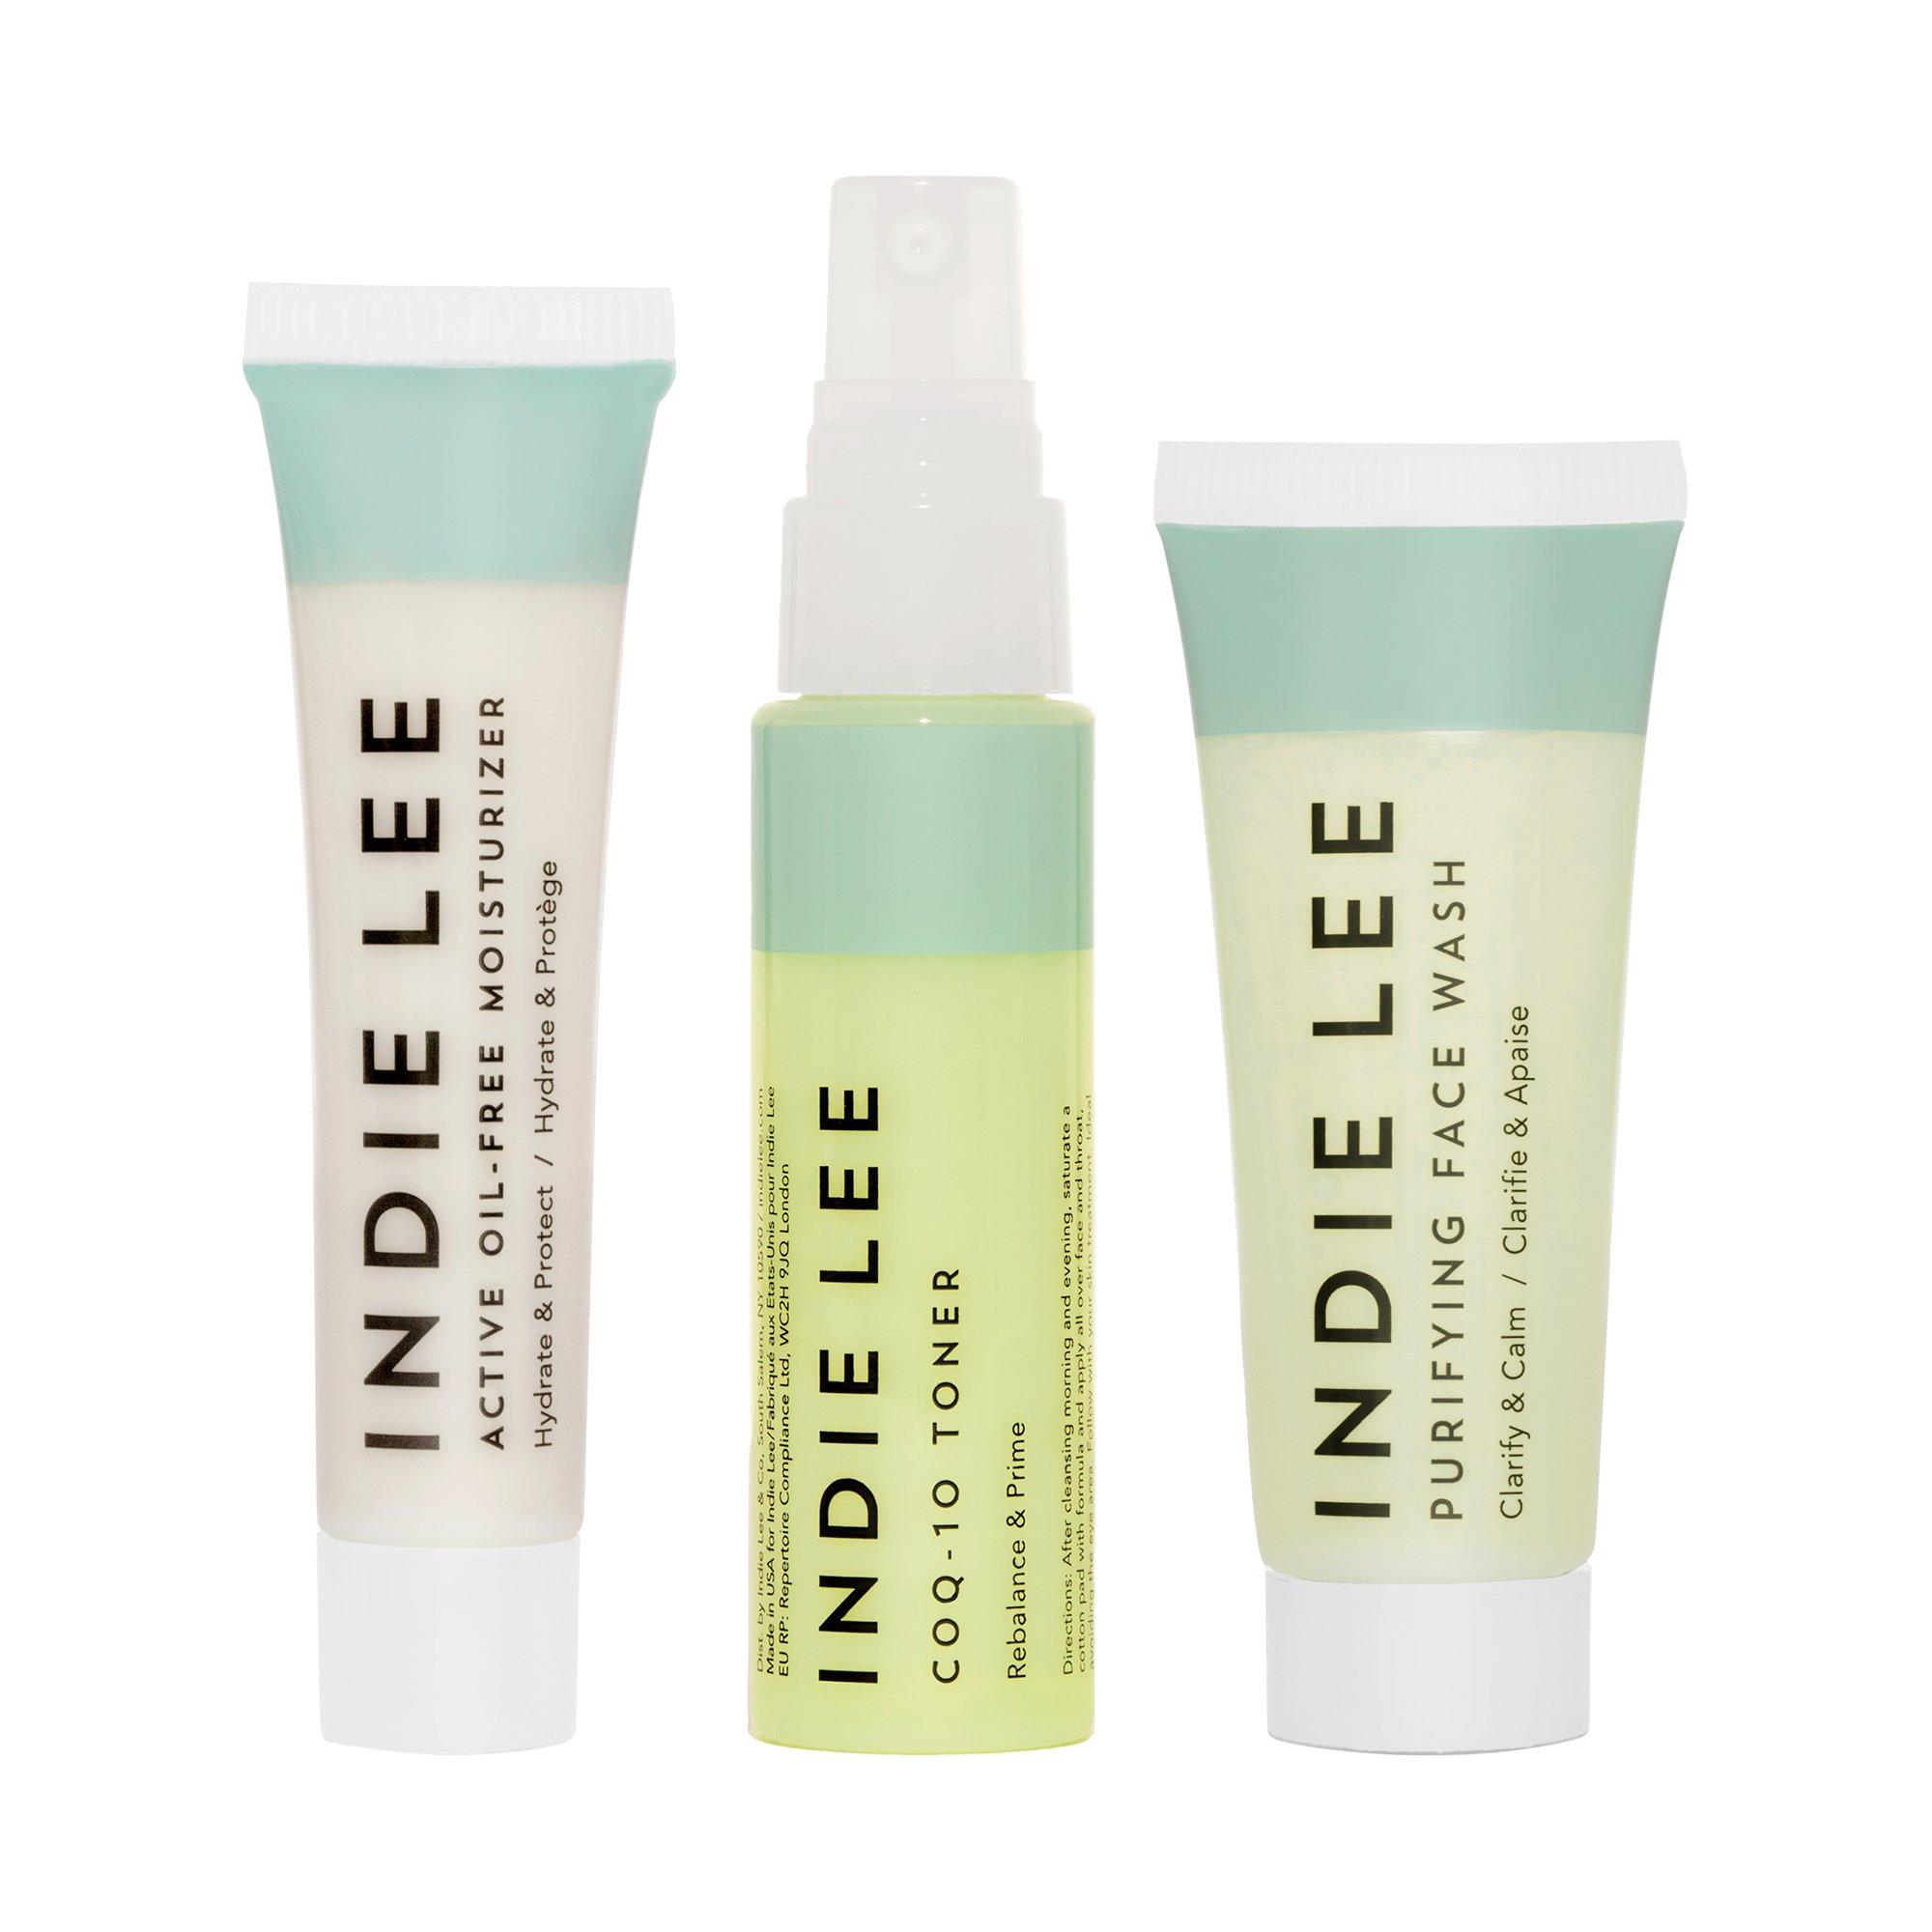 INDIE LEE Clarity Clarity Kit 